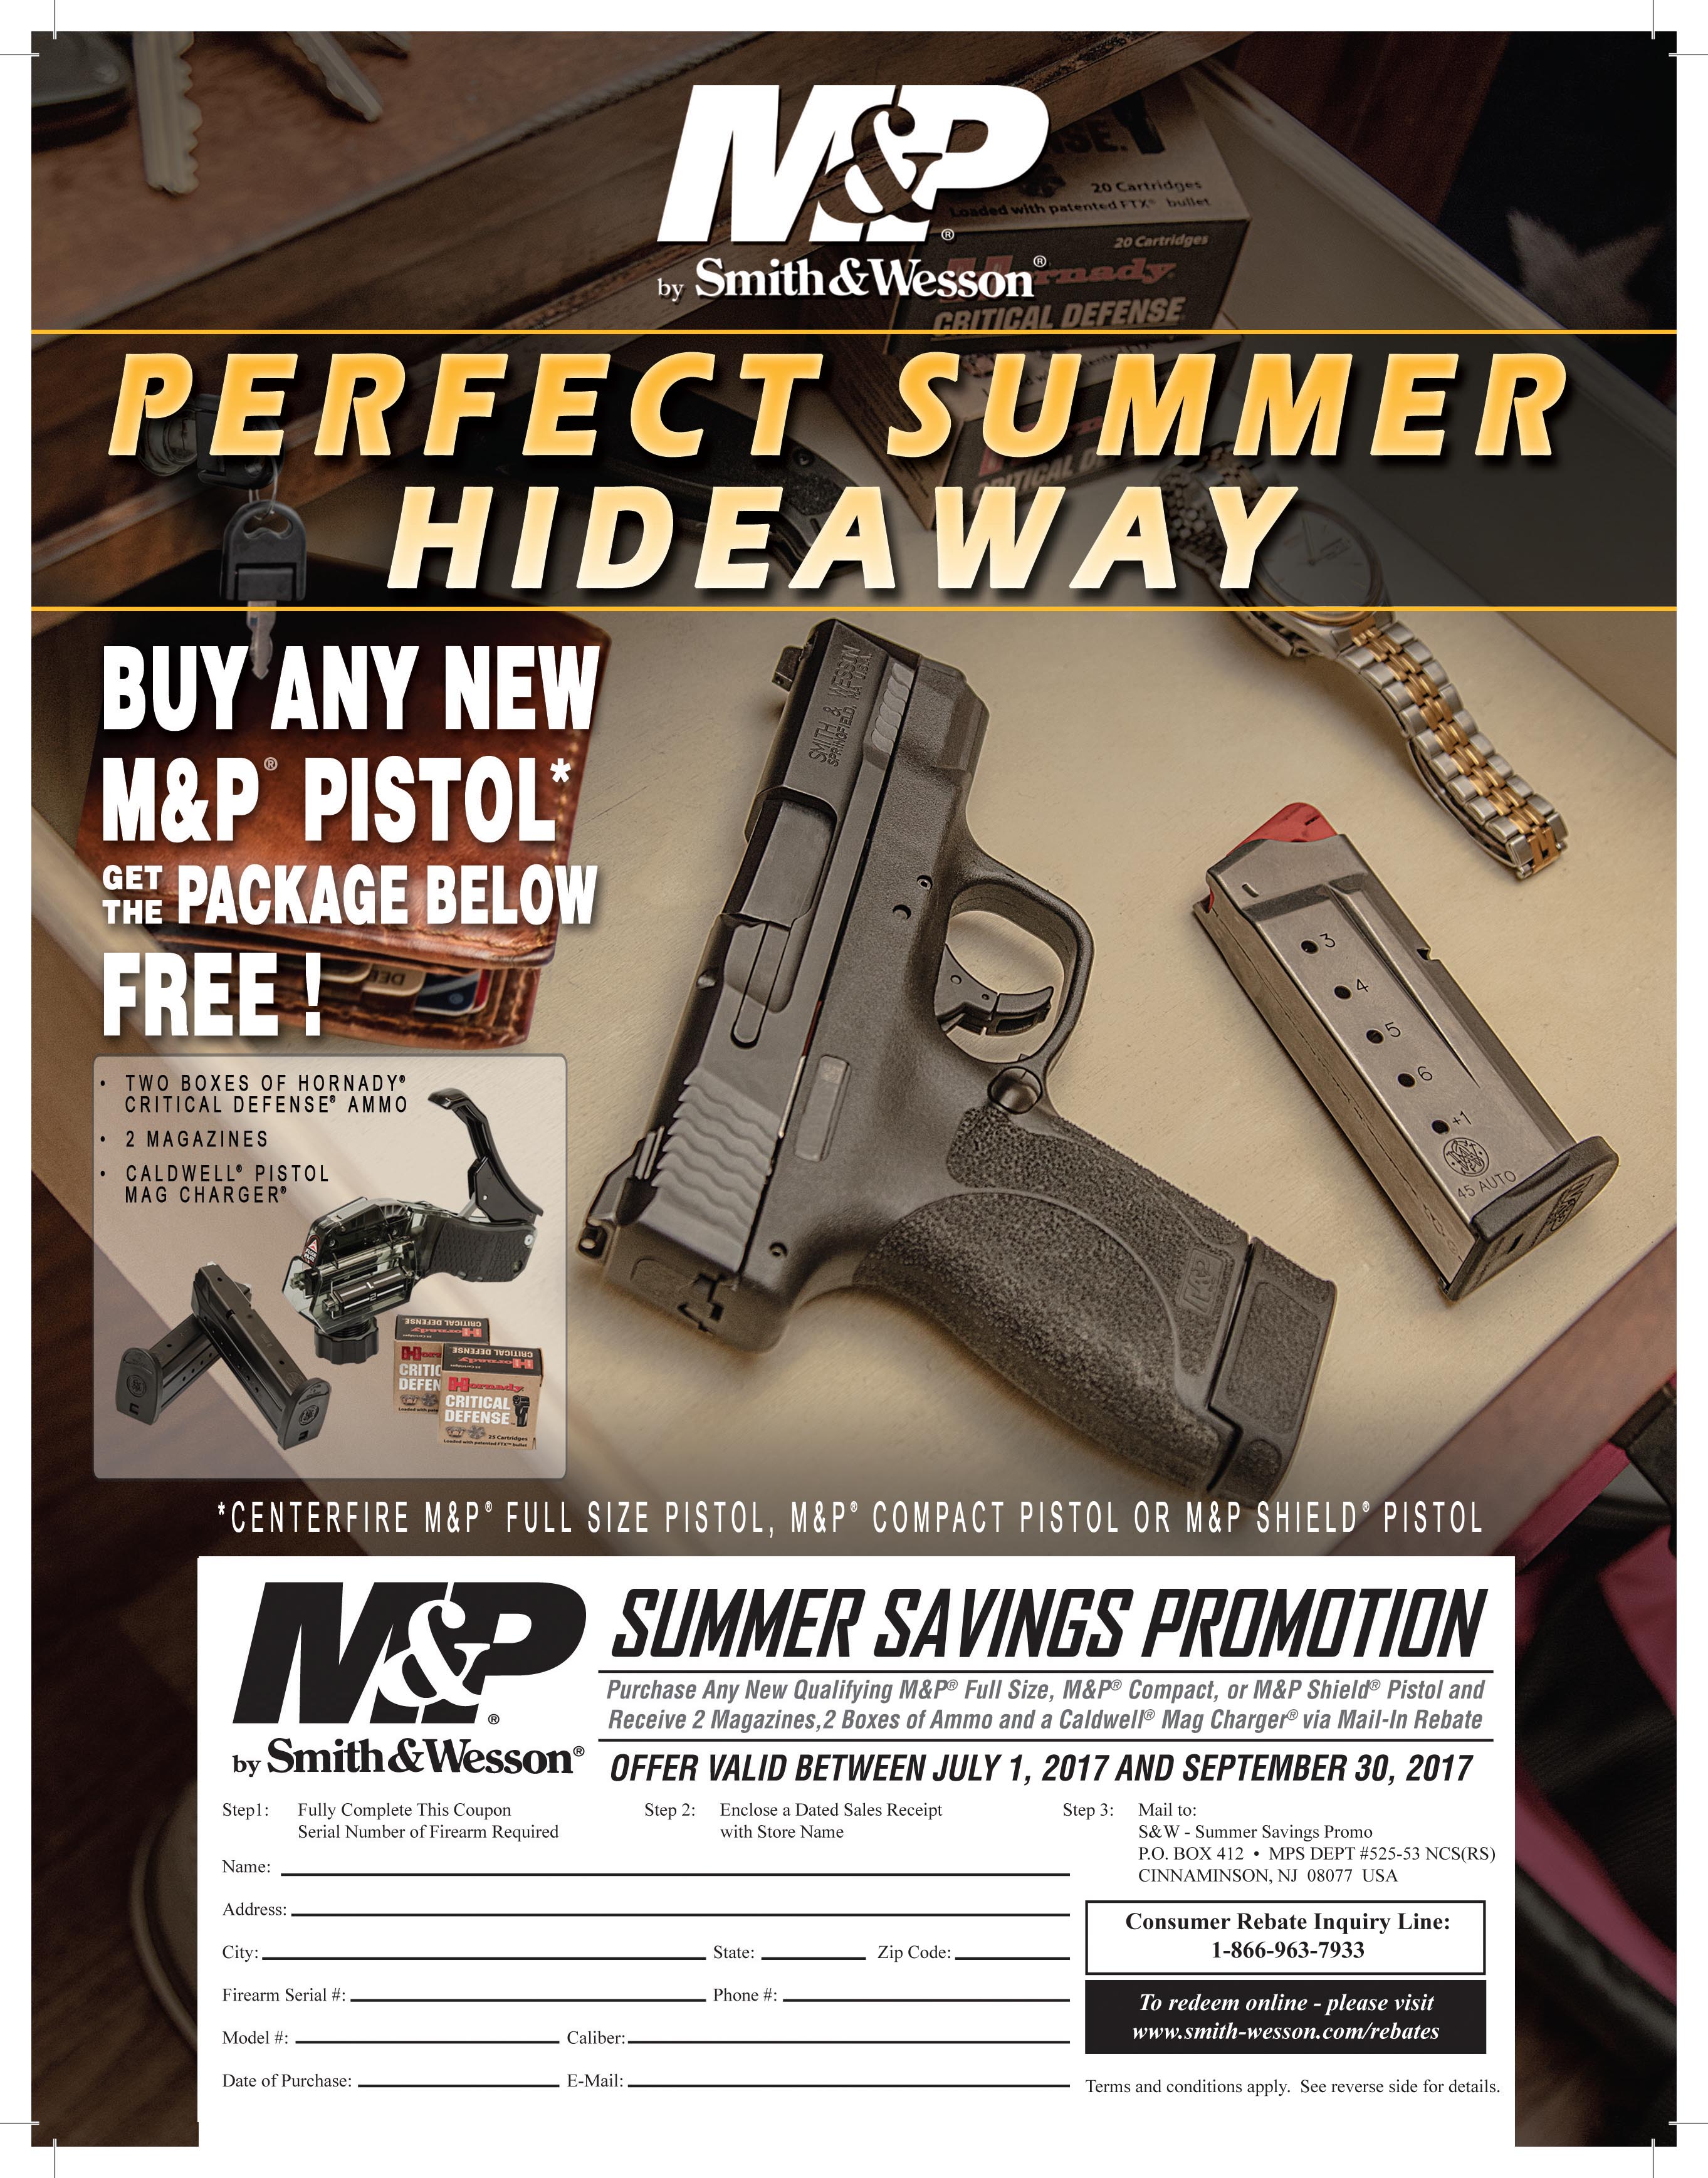 Smith & Wesson Perfect Summer Hideaway Rebate Offer Details